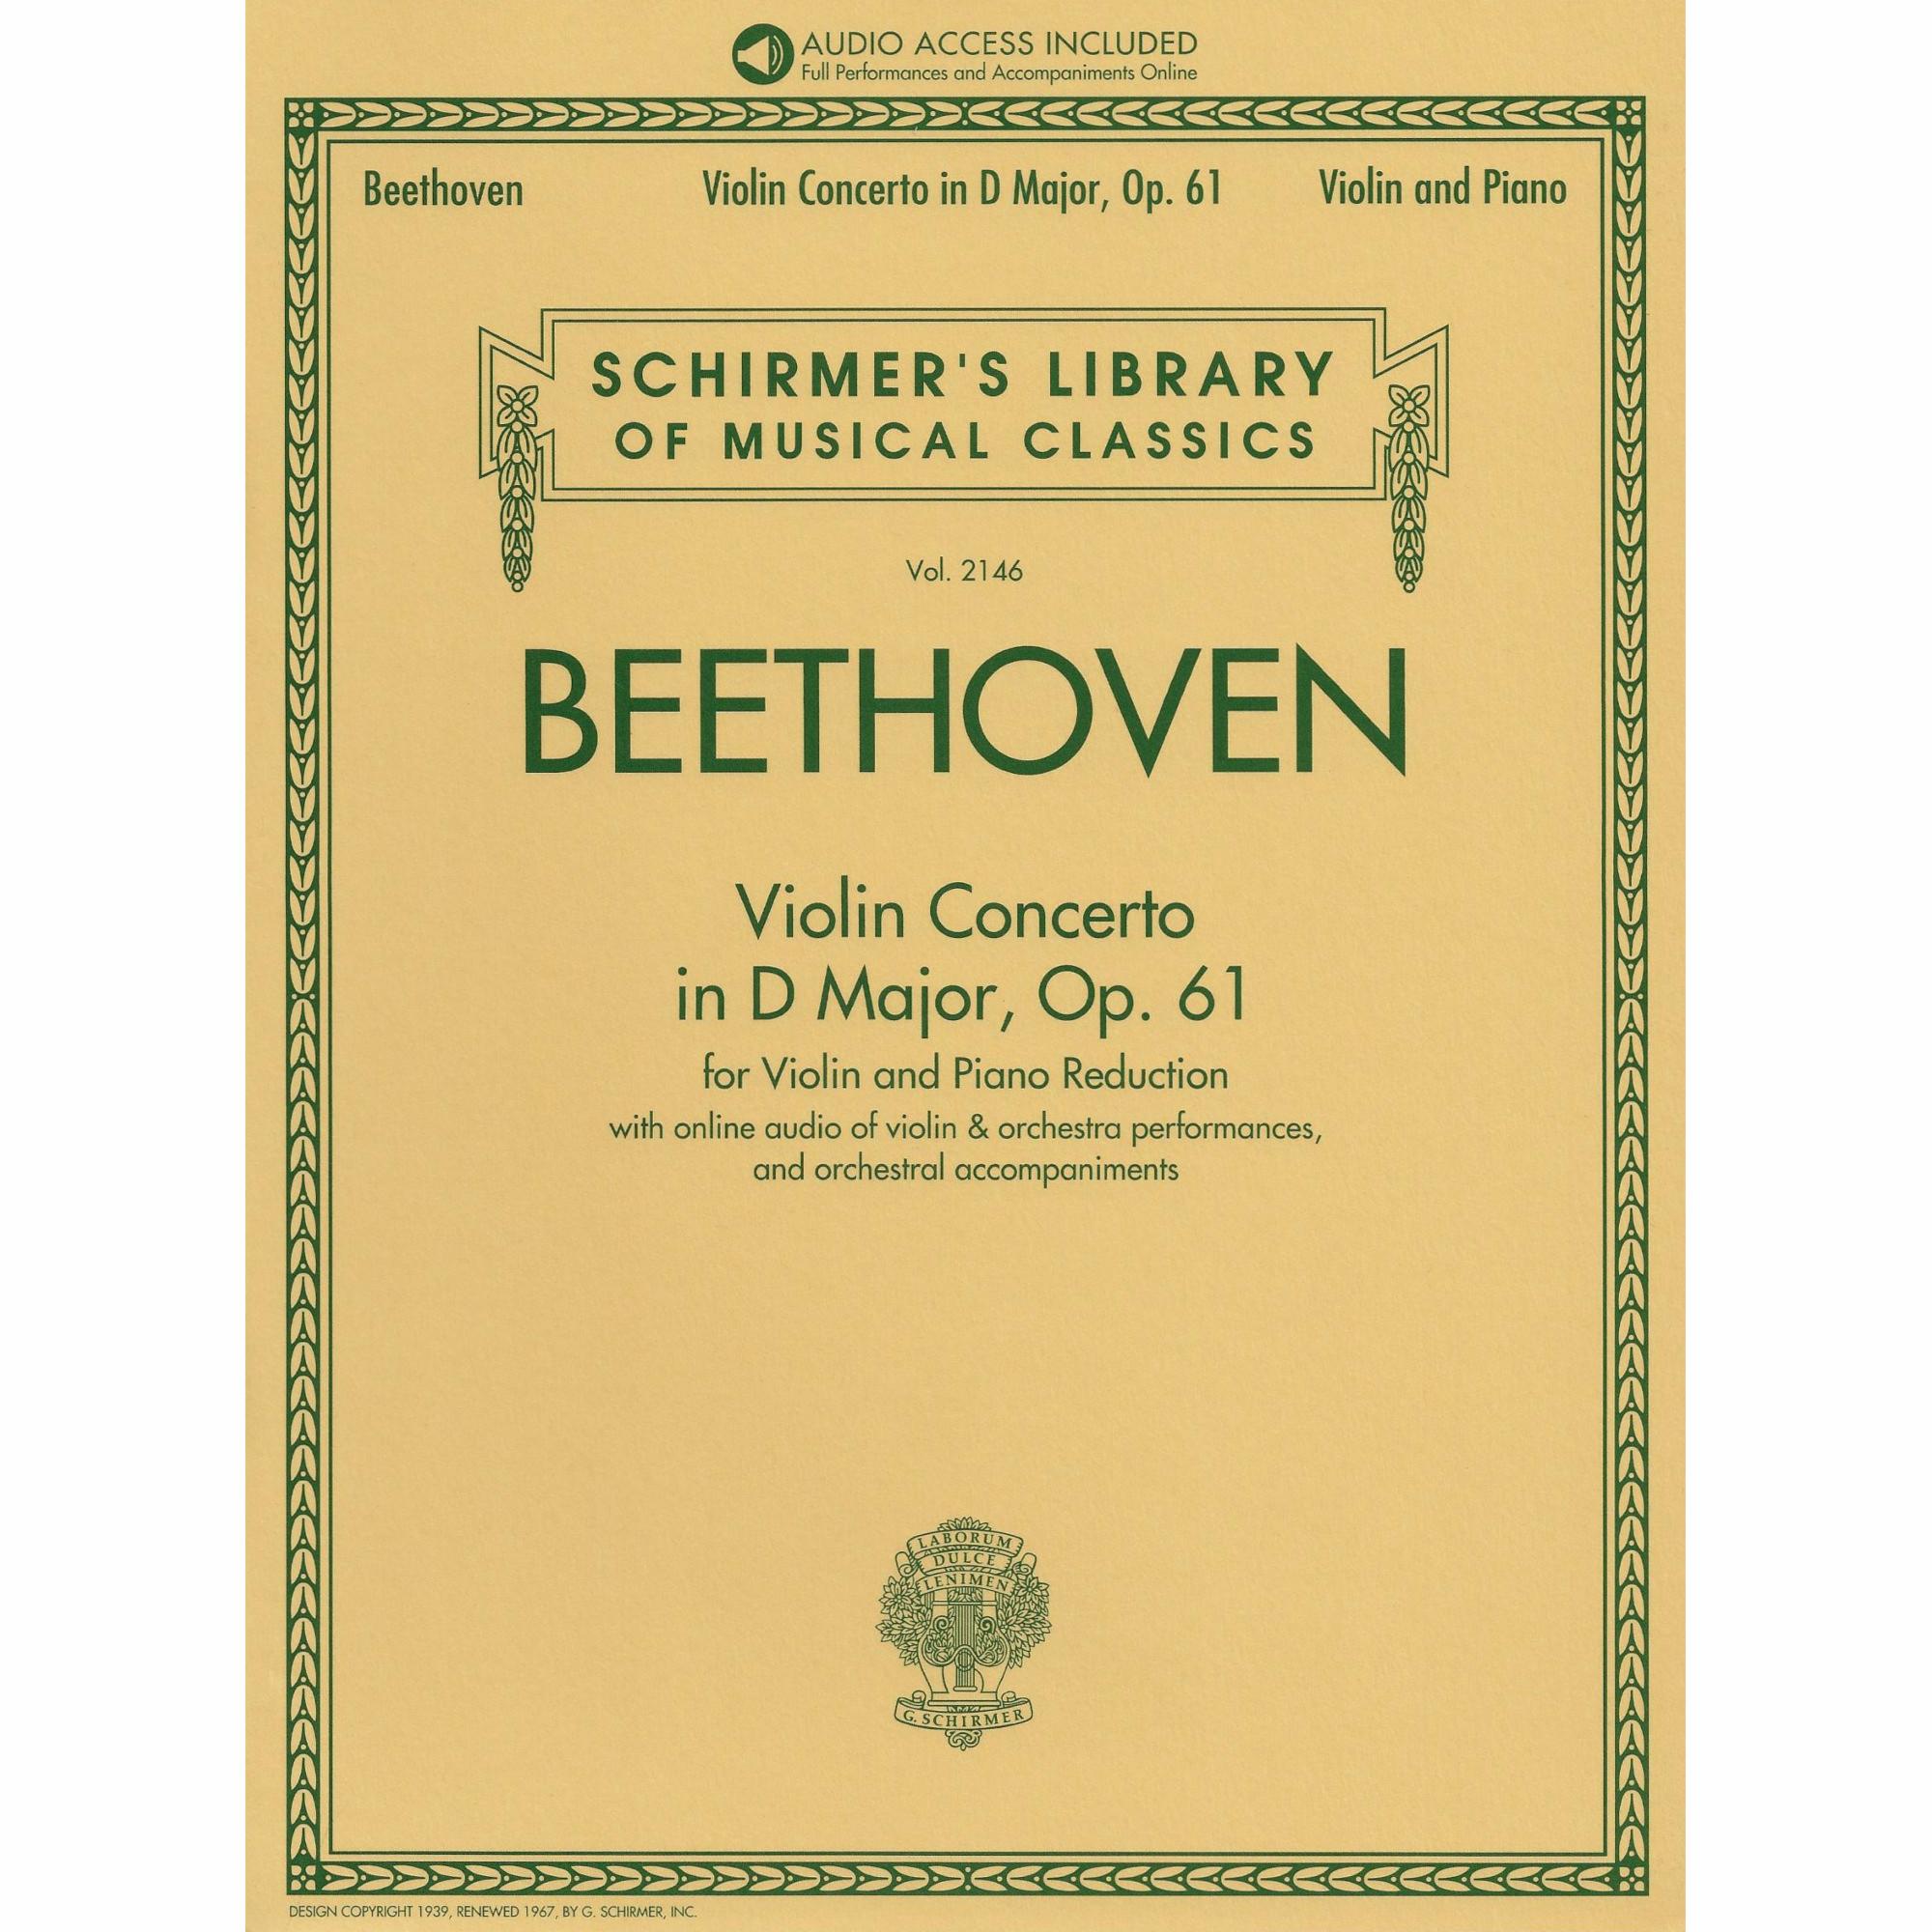 Beethoven -- Violin Concerto in D Major, Op. 61 for Violin and Piano (or Recorded Accompaniment)